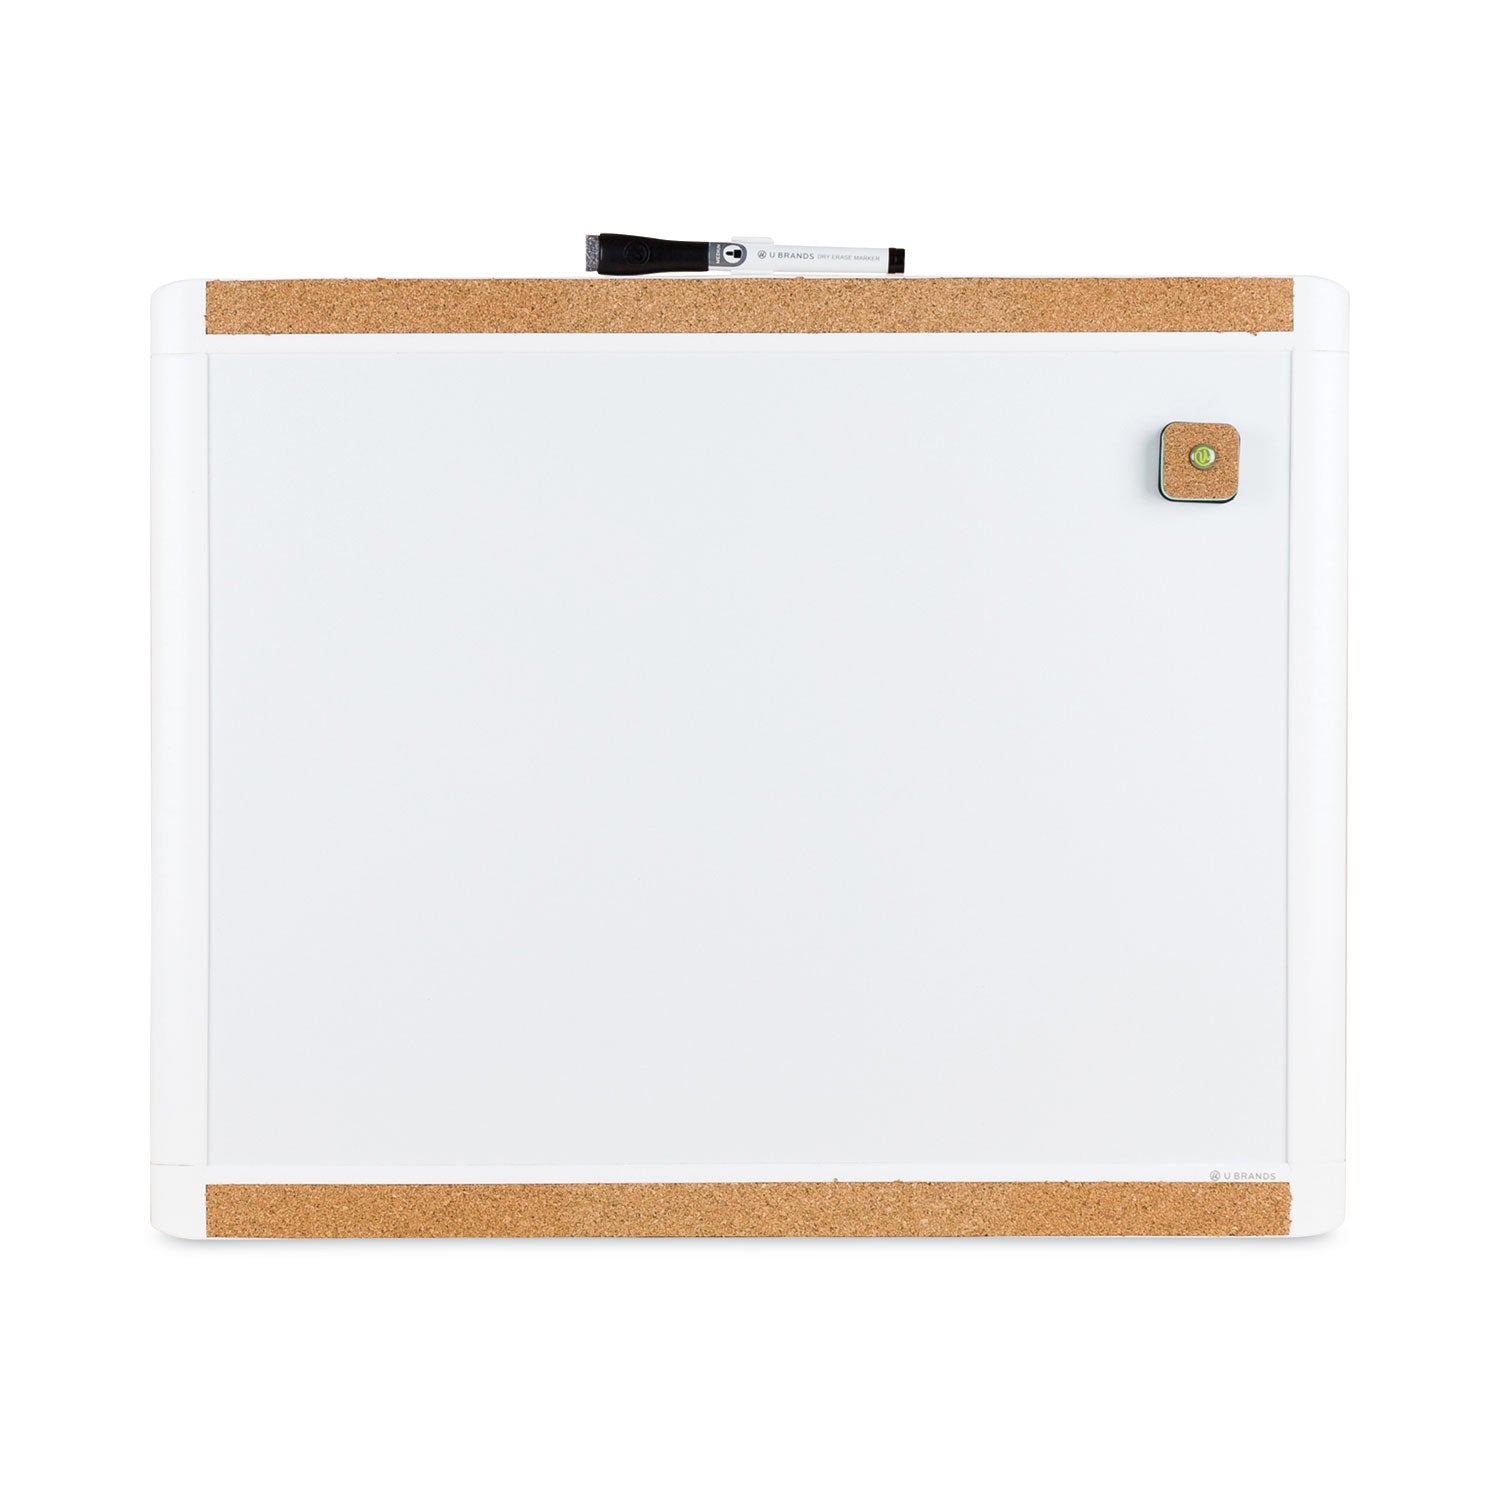 pinit-magnetic-dry-erase-board-with-plastic-frame-20-x-16-white-surface-white-plastic-frame_ubr428u0001 - 1